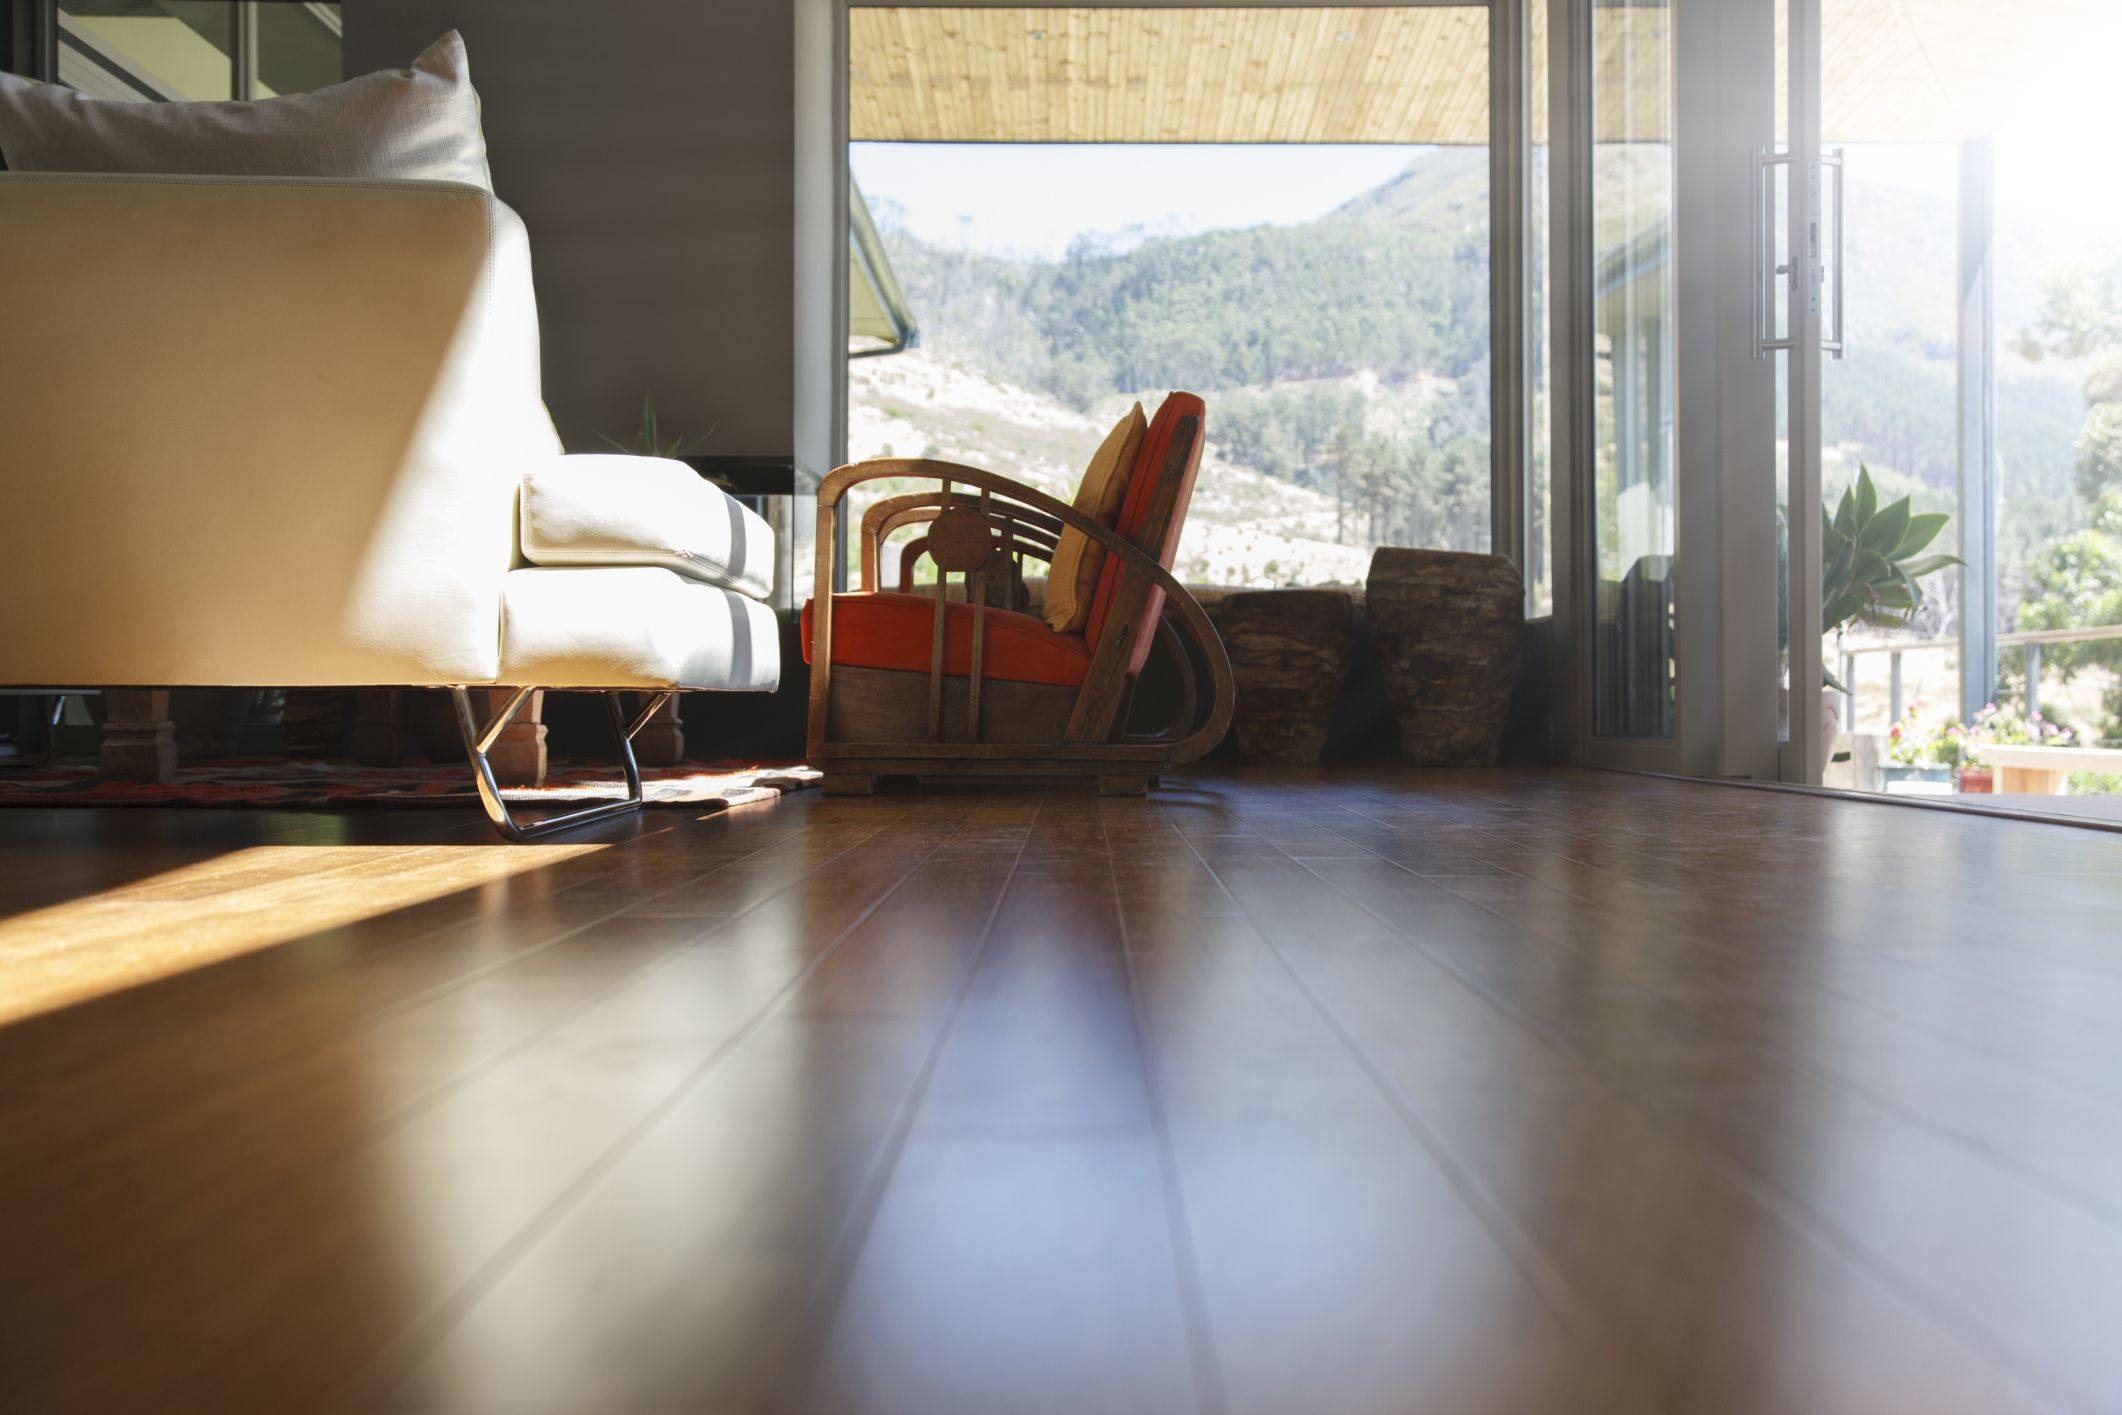 hardwood floor cleaner reviews of pros and cons of bellawood flooring from lumber liquidators with exotic hardwood flooring 525439899 56a49d3a3df78cf77283453d